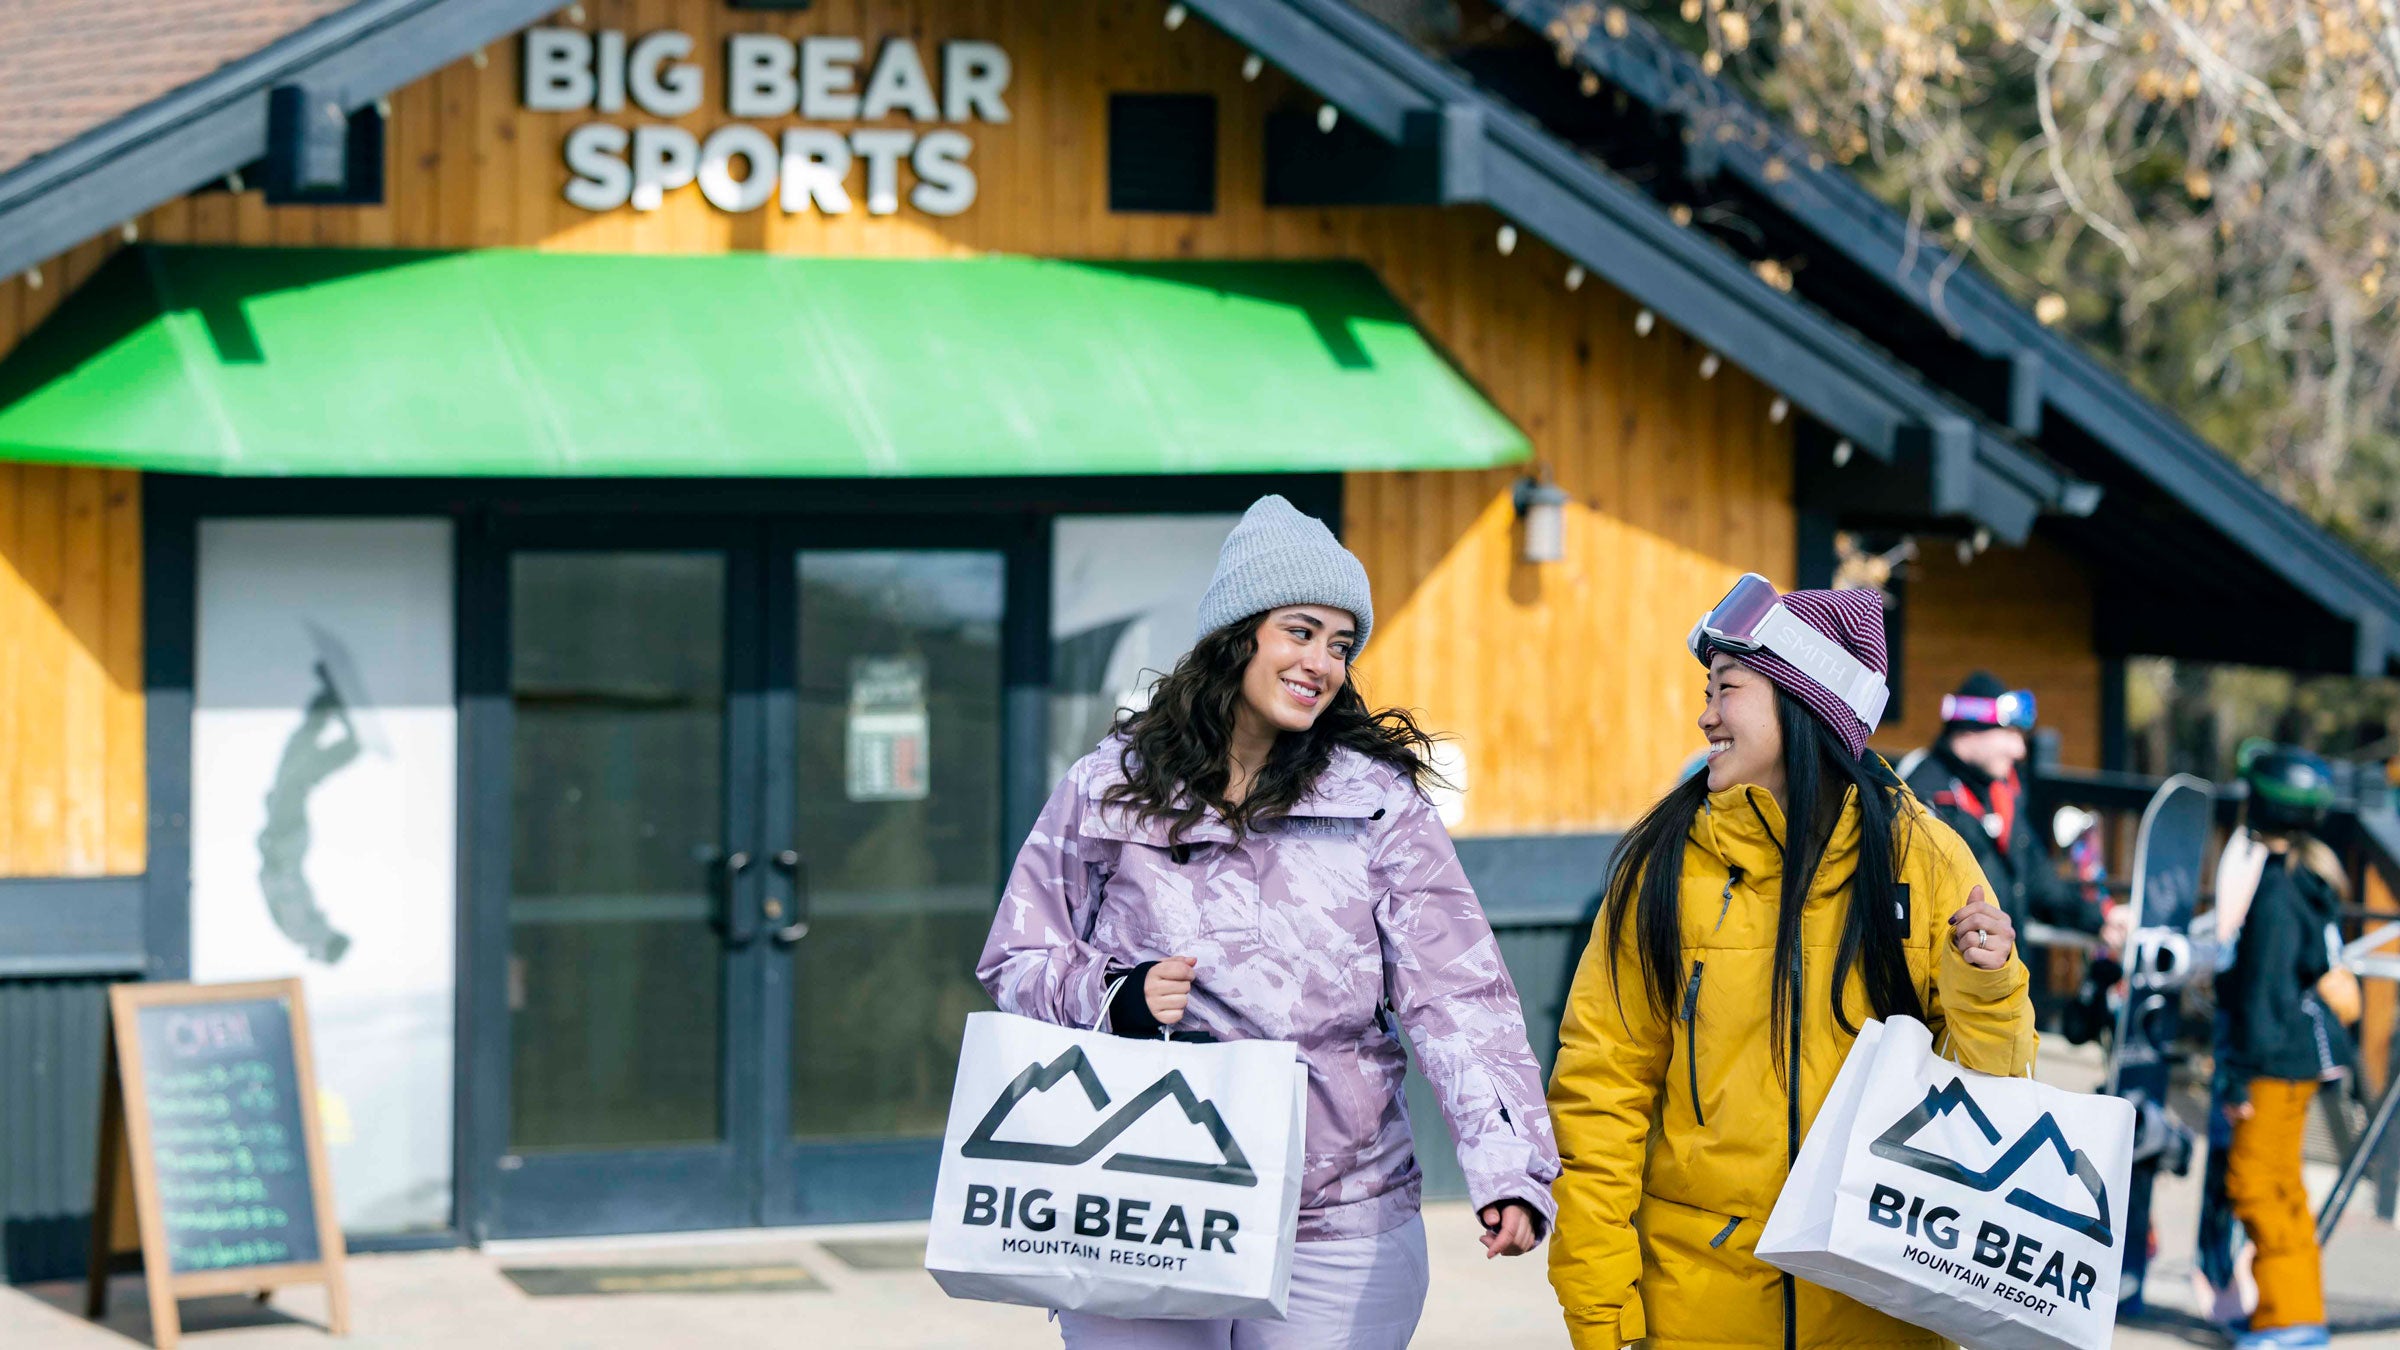 Big Bear Sports retail store with guests carrying bags